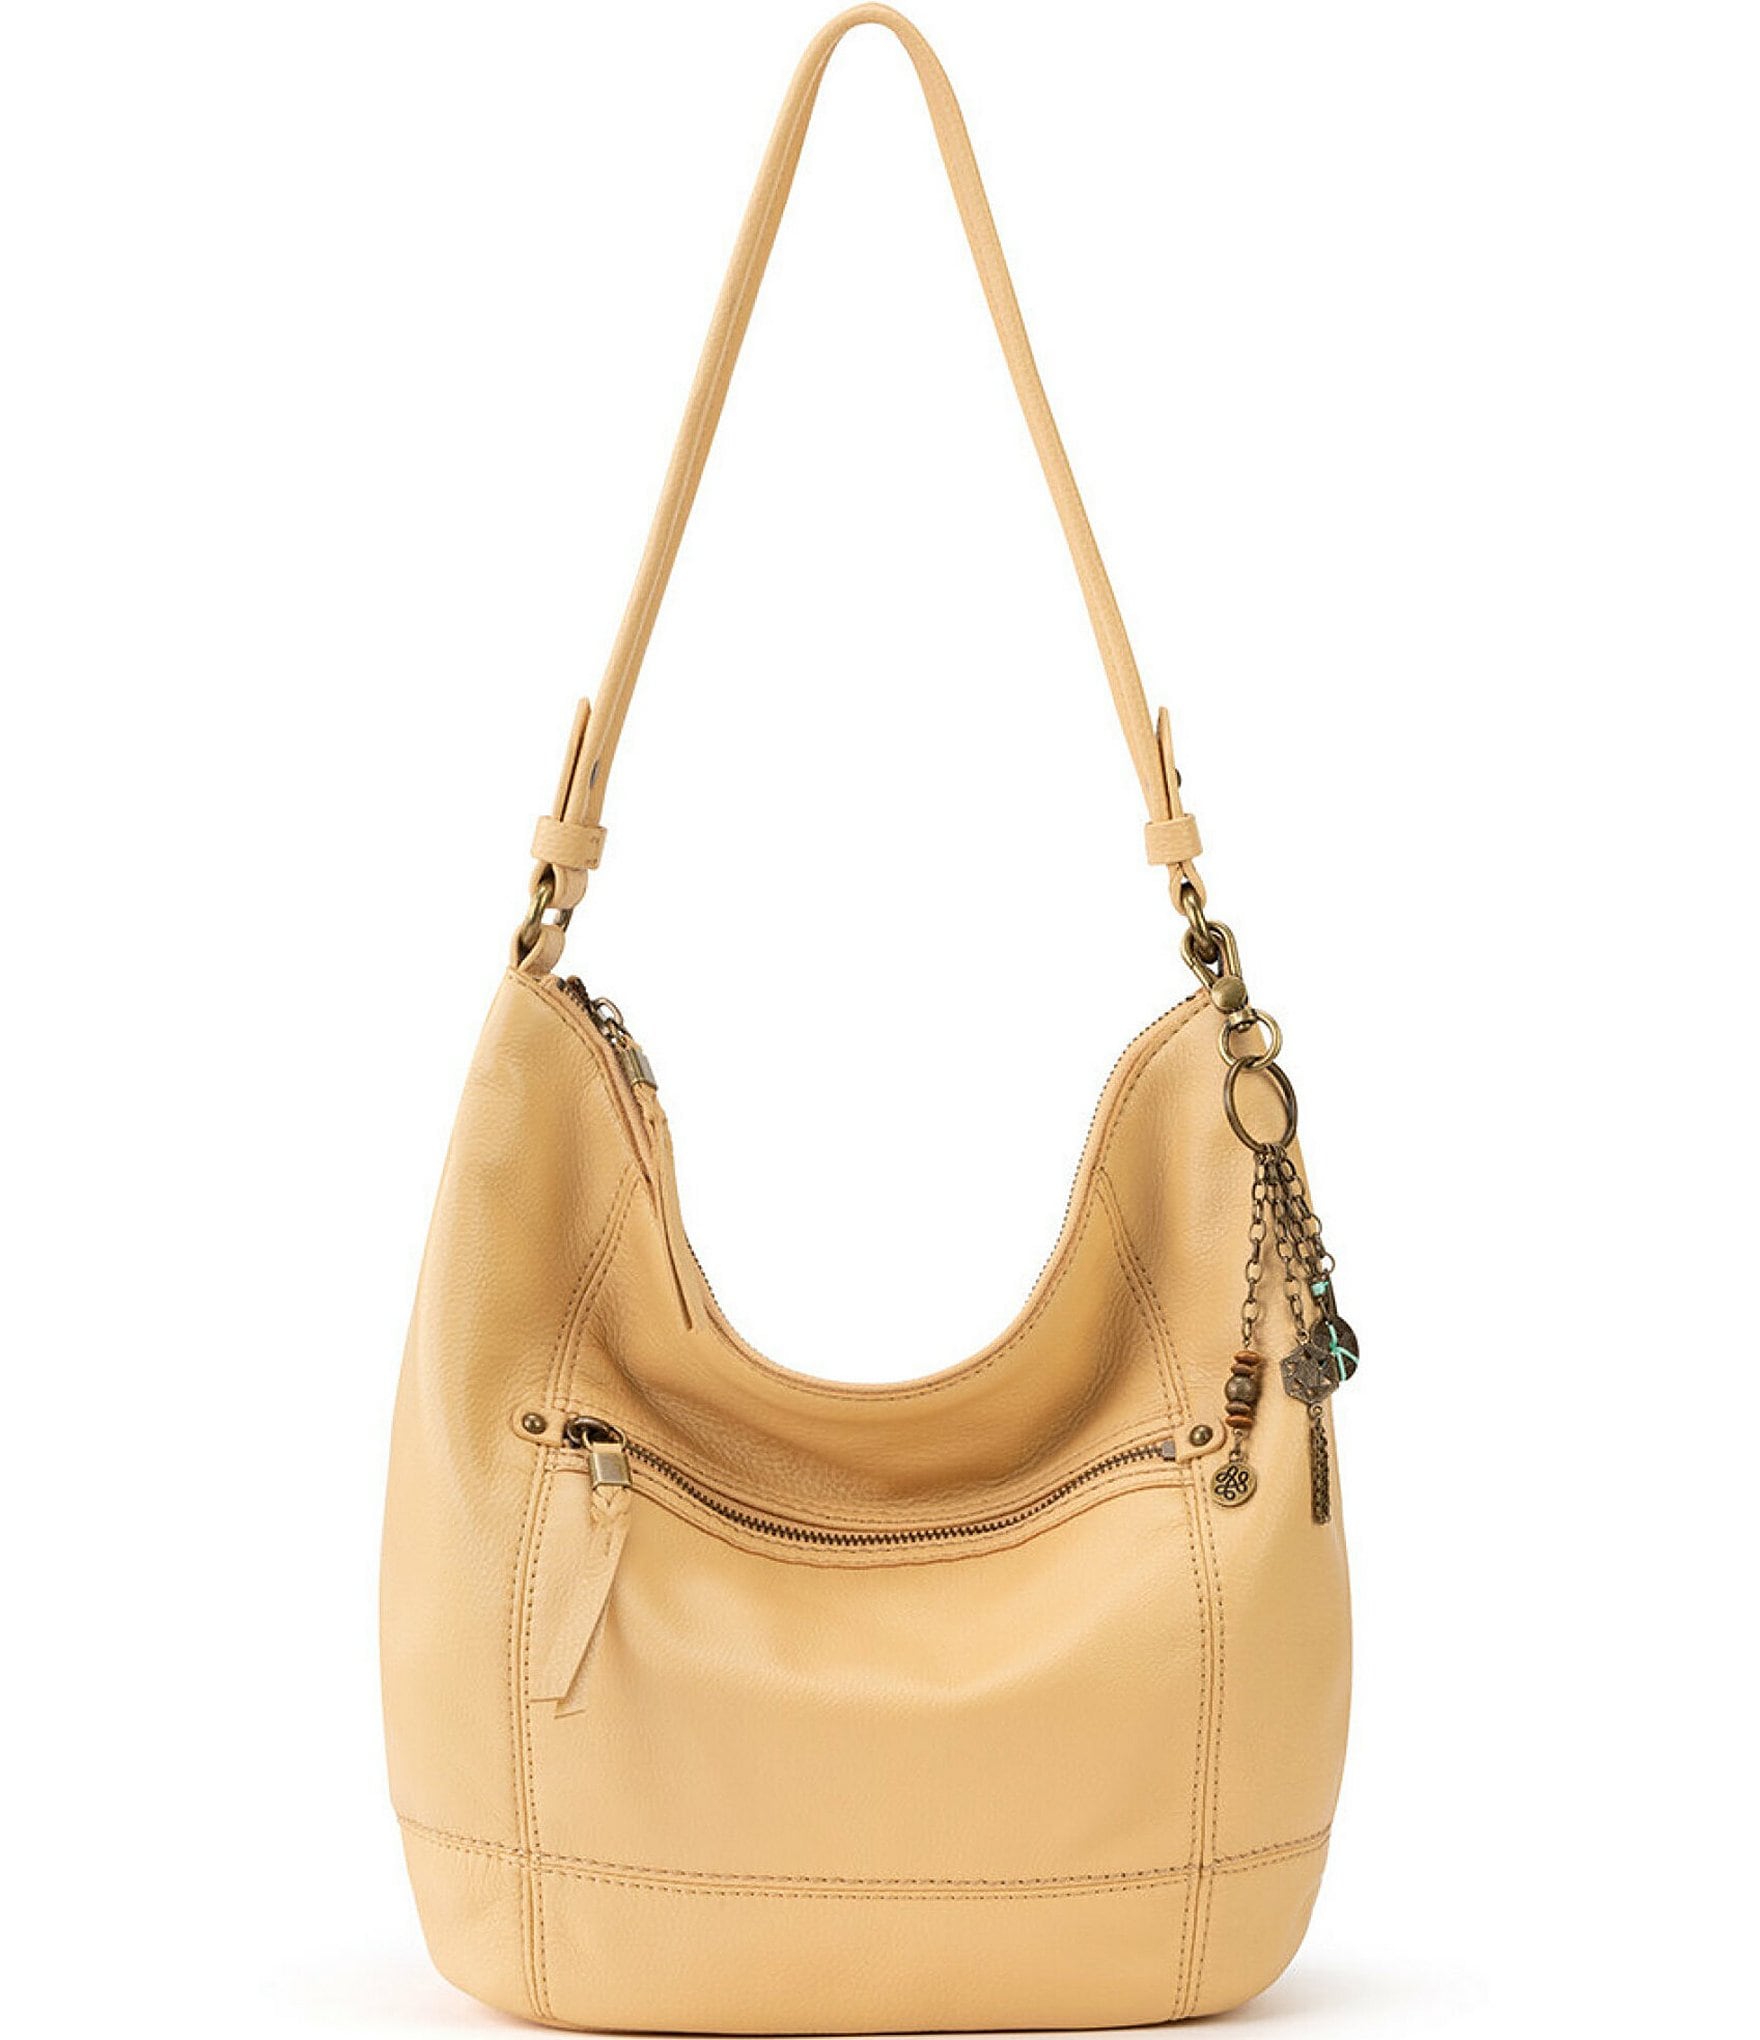 Lake Leather - Miena- Women's Small Leather Crossbody Bag